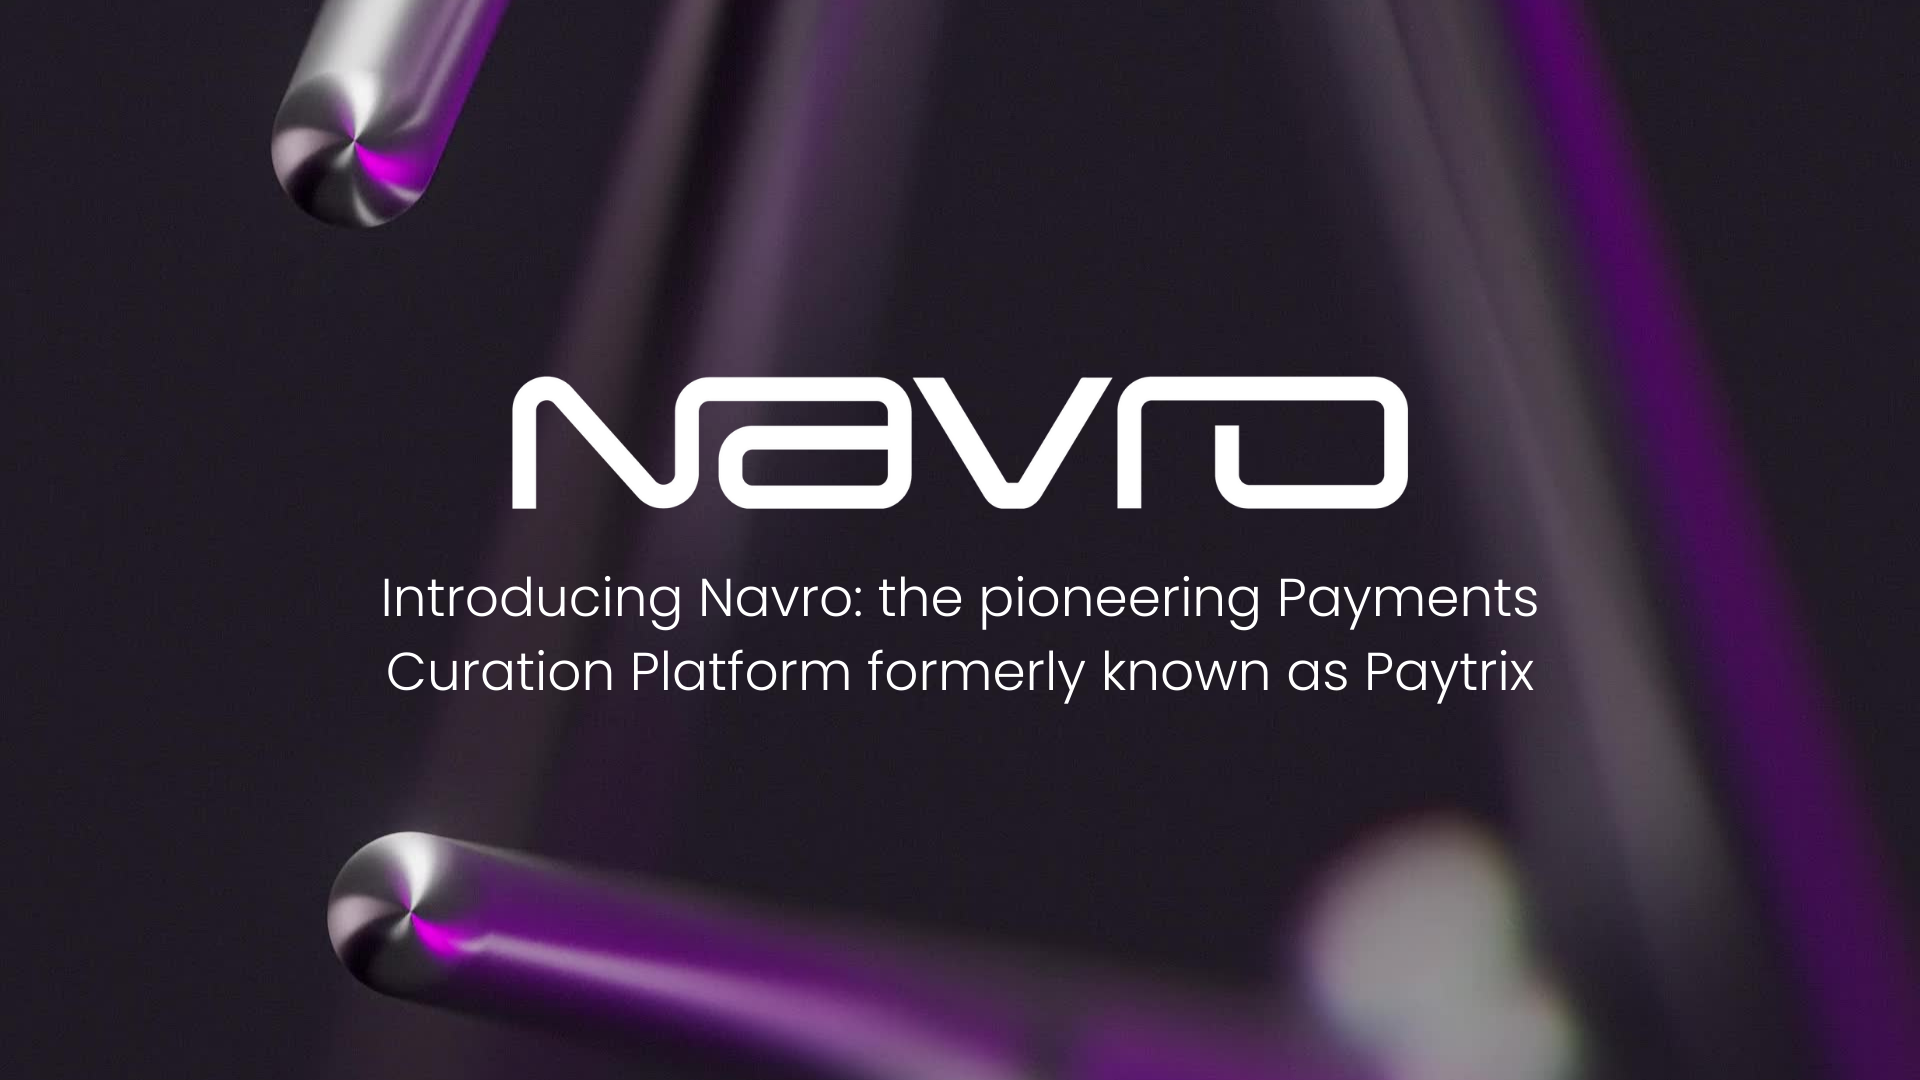 Navro (Formerly Paytrix) is Authorised by Central Bank of Ireland to Provide EU-Regulated, Global Payment Services and Has Secured $14M